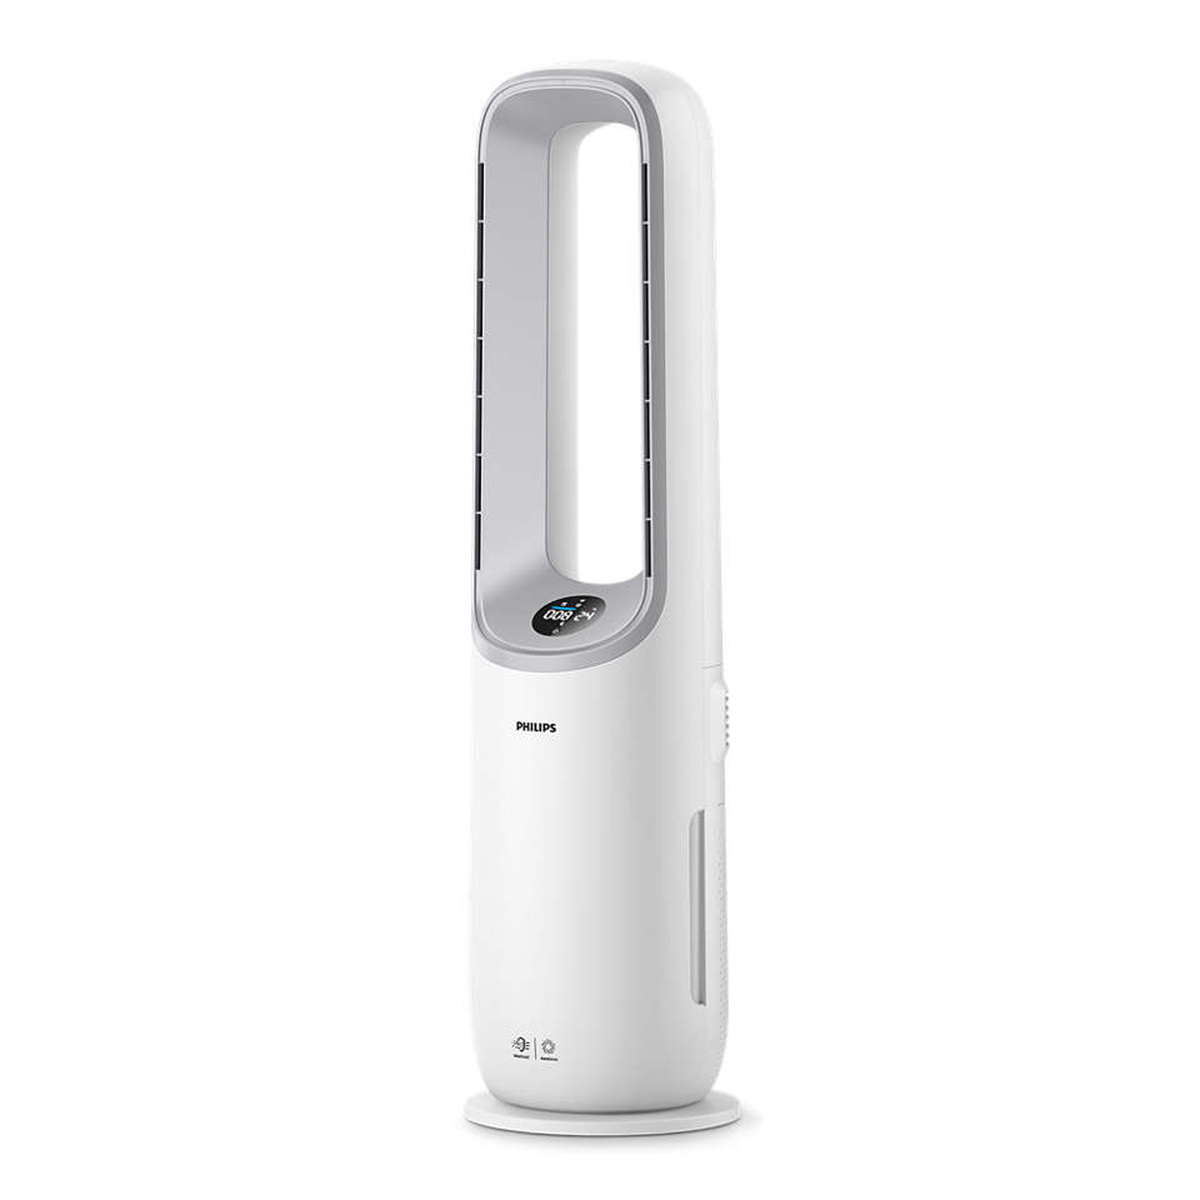 Philips Air Performer 7000 Series 2-in-1 Air Purifier and Fan, White/Gray, AMF765/30